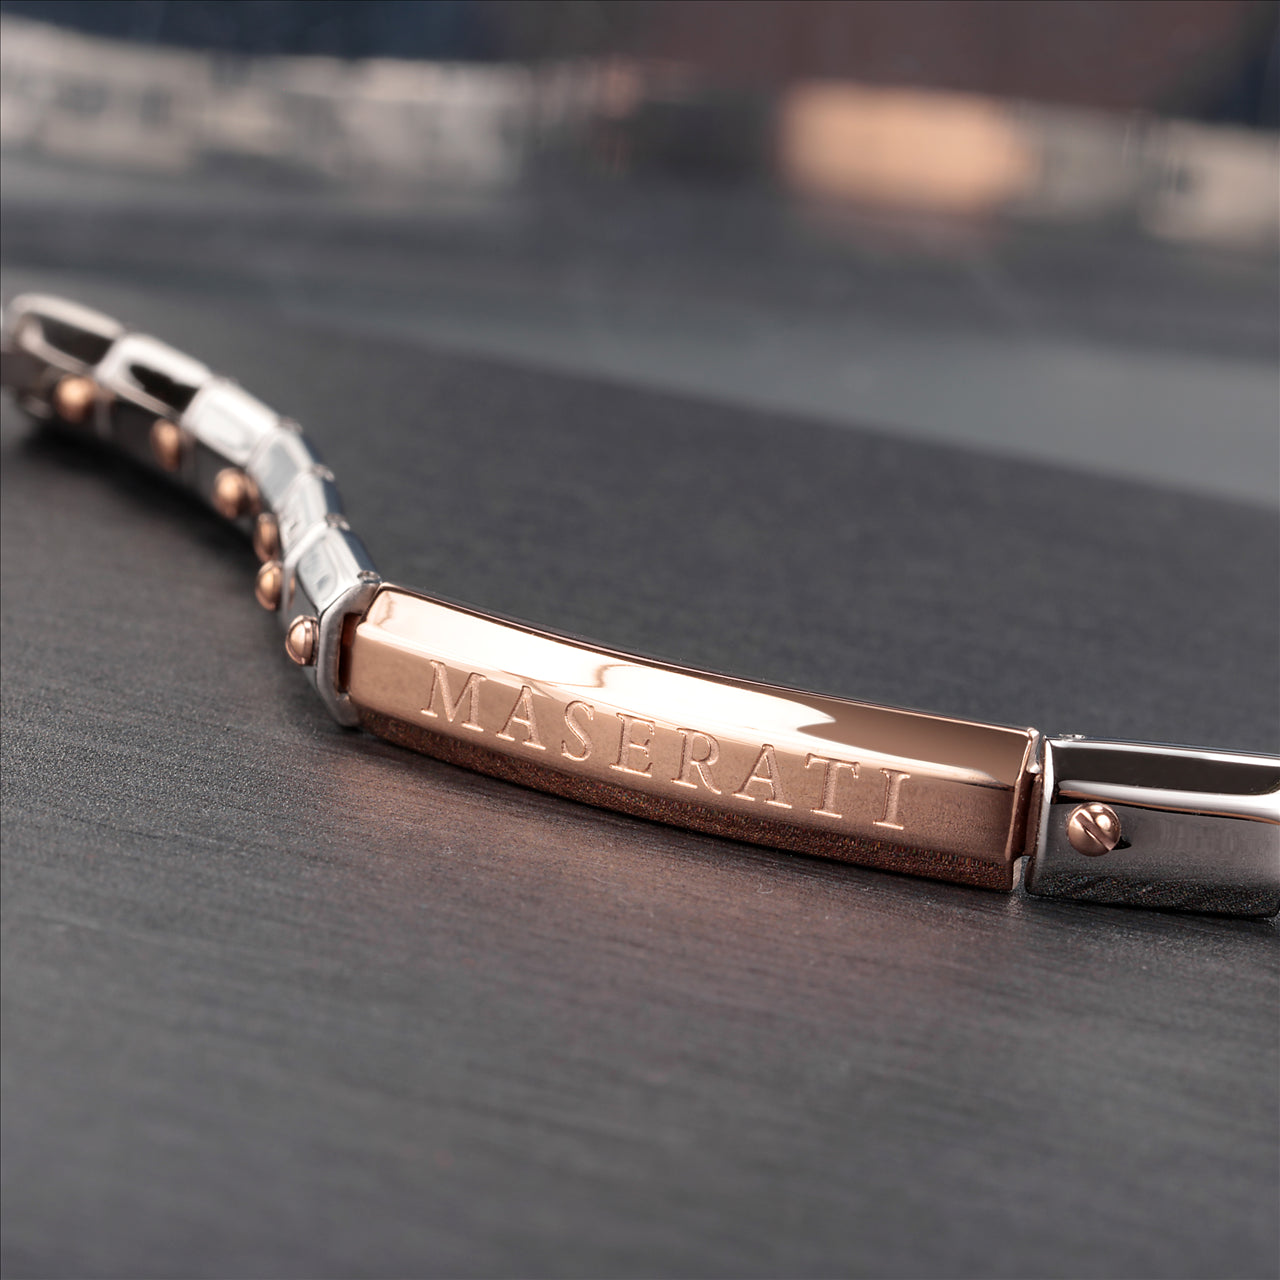 Maserati Jewels Bracelet Stainless Steel & Rose Gold Tag & Screw 215mm